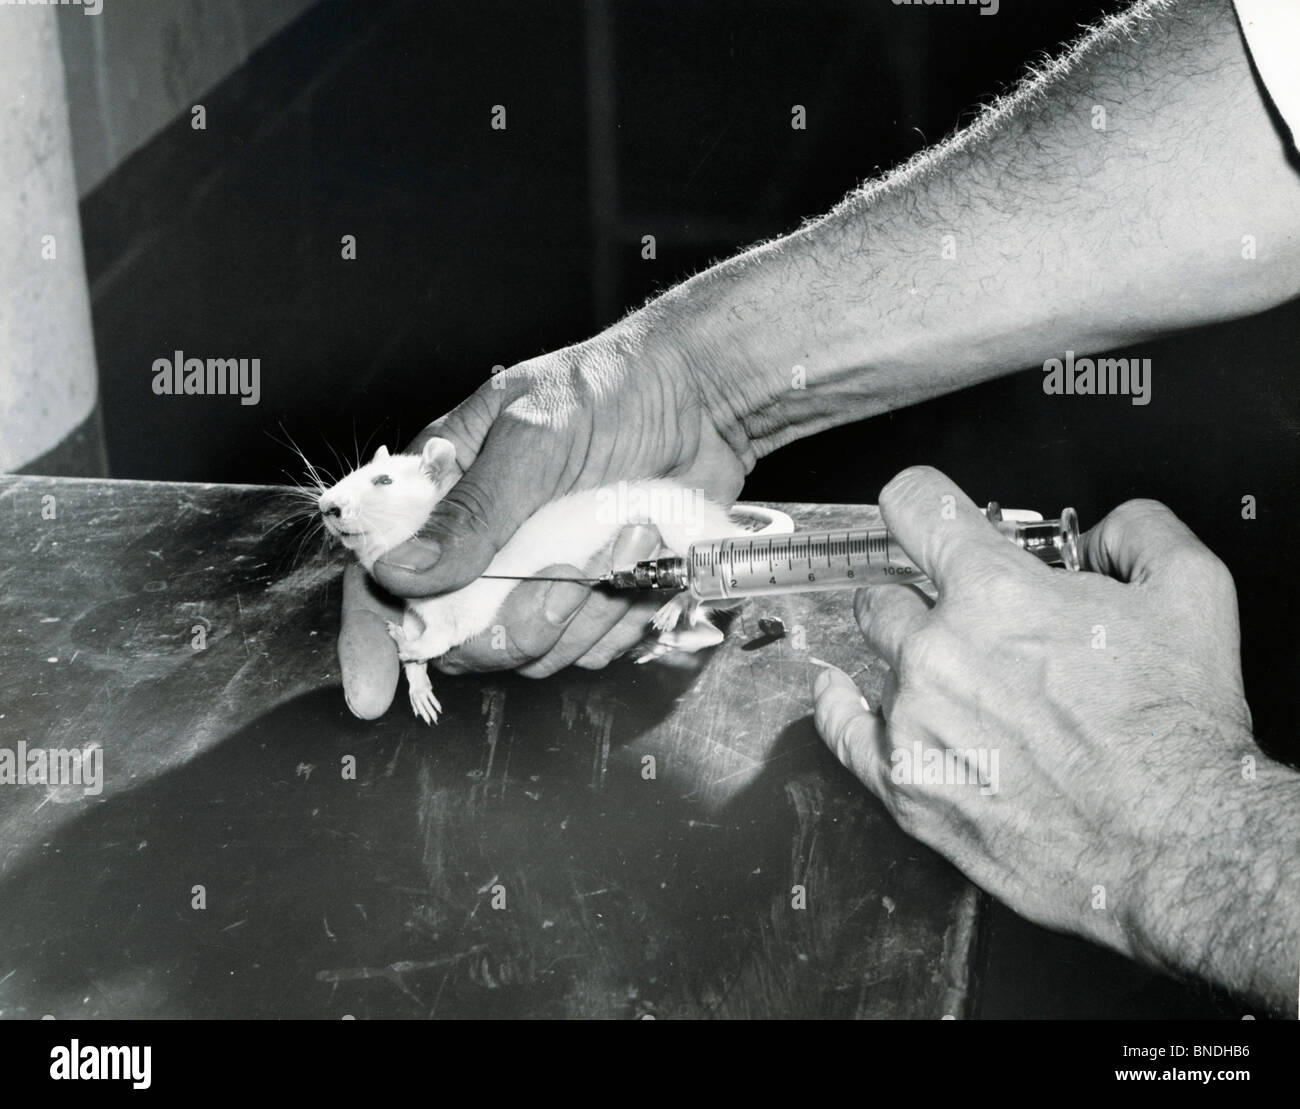 Close-up of a scientist injecting a rat Stock Photo